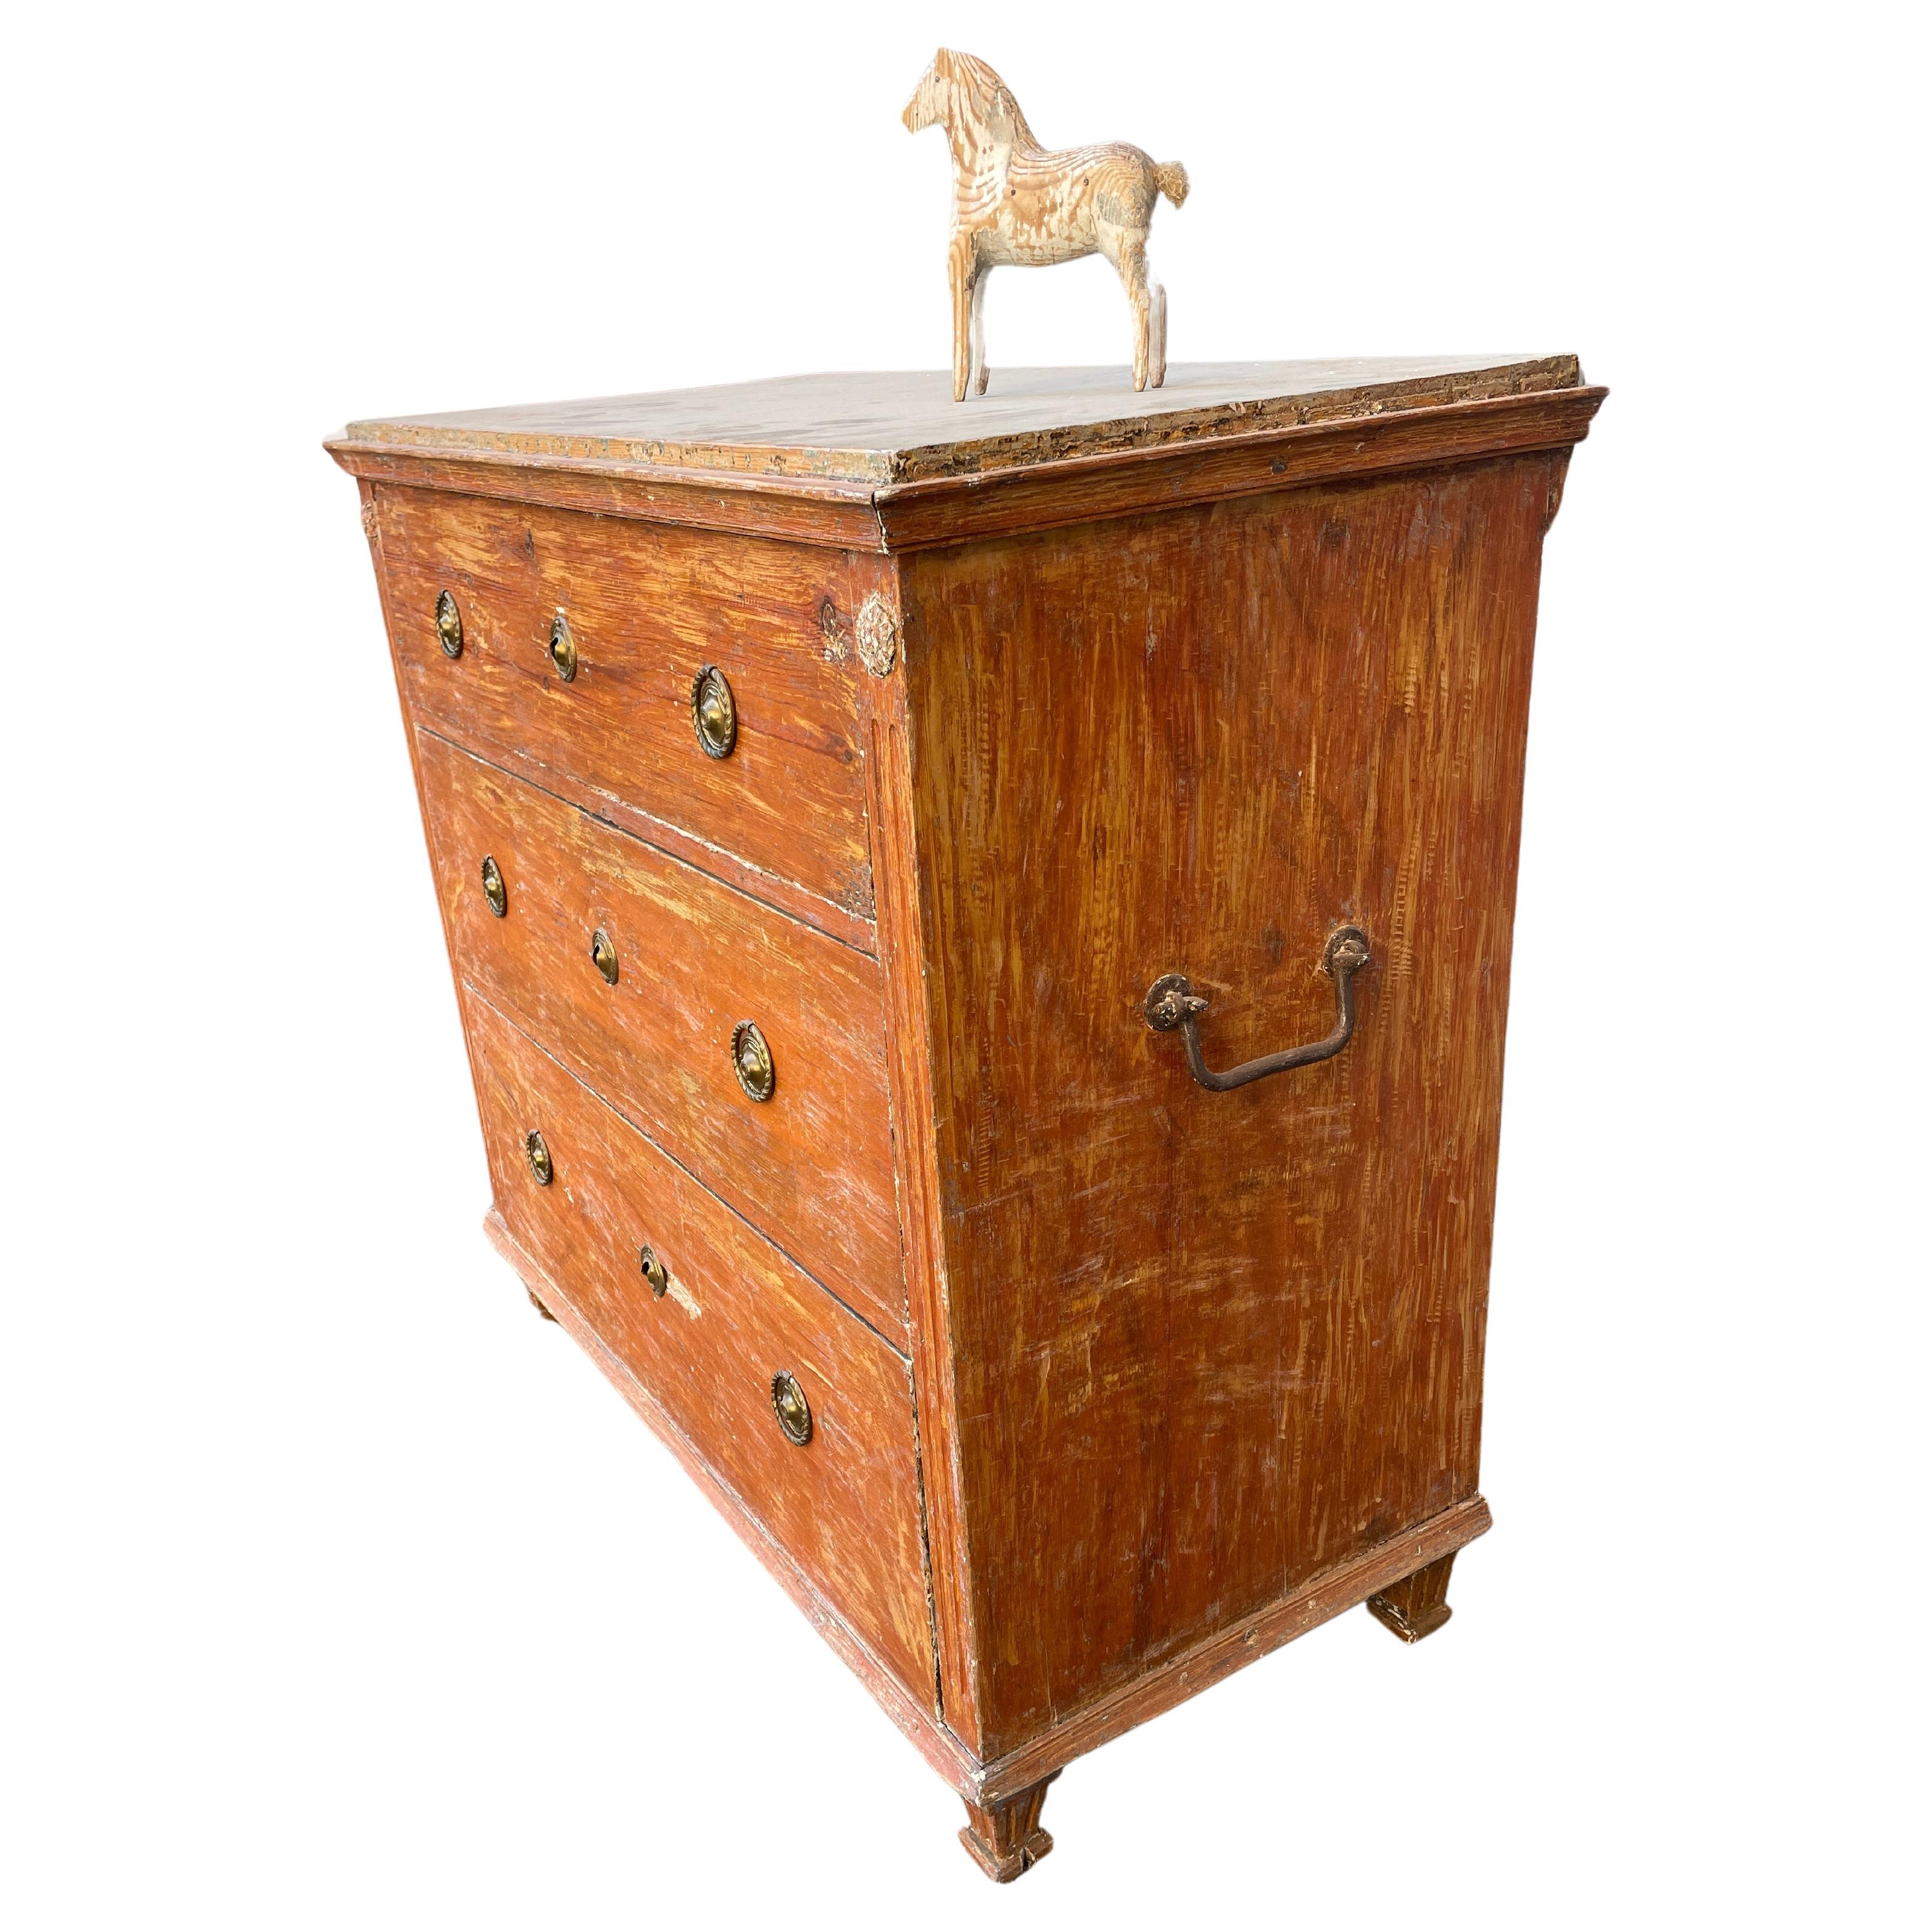 Painted Chest of Drawers with Faux Marble Painted Top

Hand carved, hand painted and hand distressed in a muted Scandinavian red toned color. The clean lines and elegance of this 3 drawer chest with period iron handles is equally at home in the